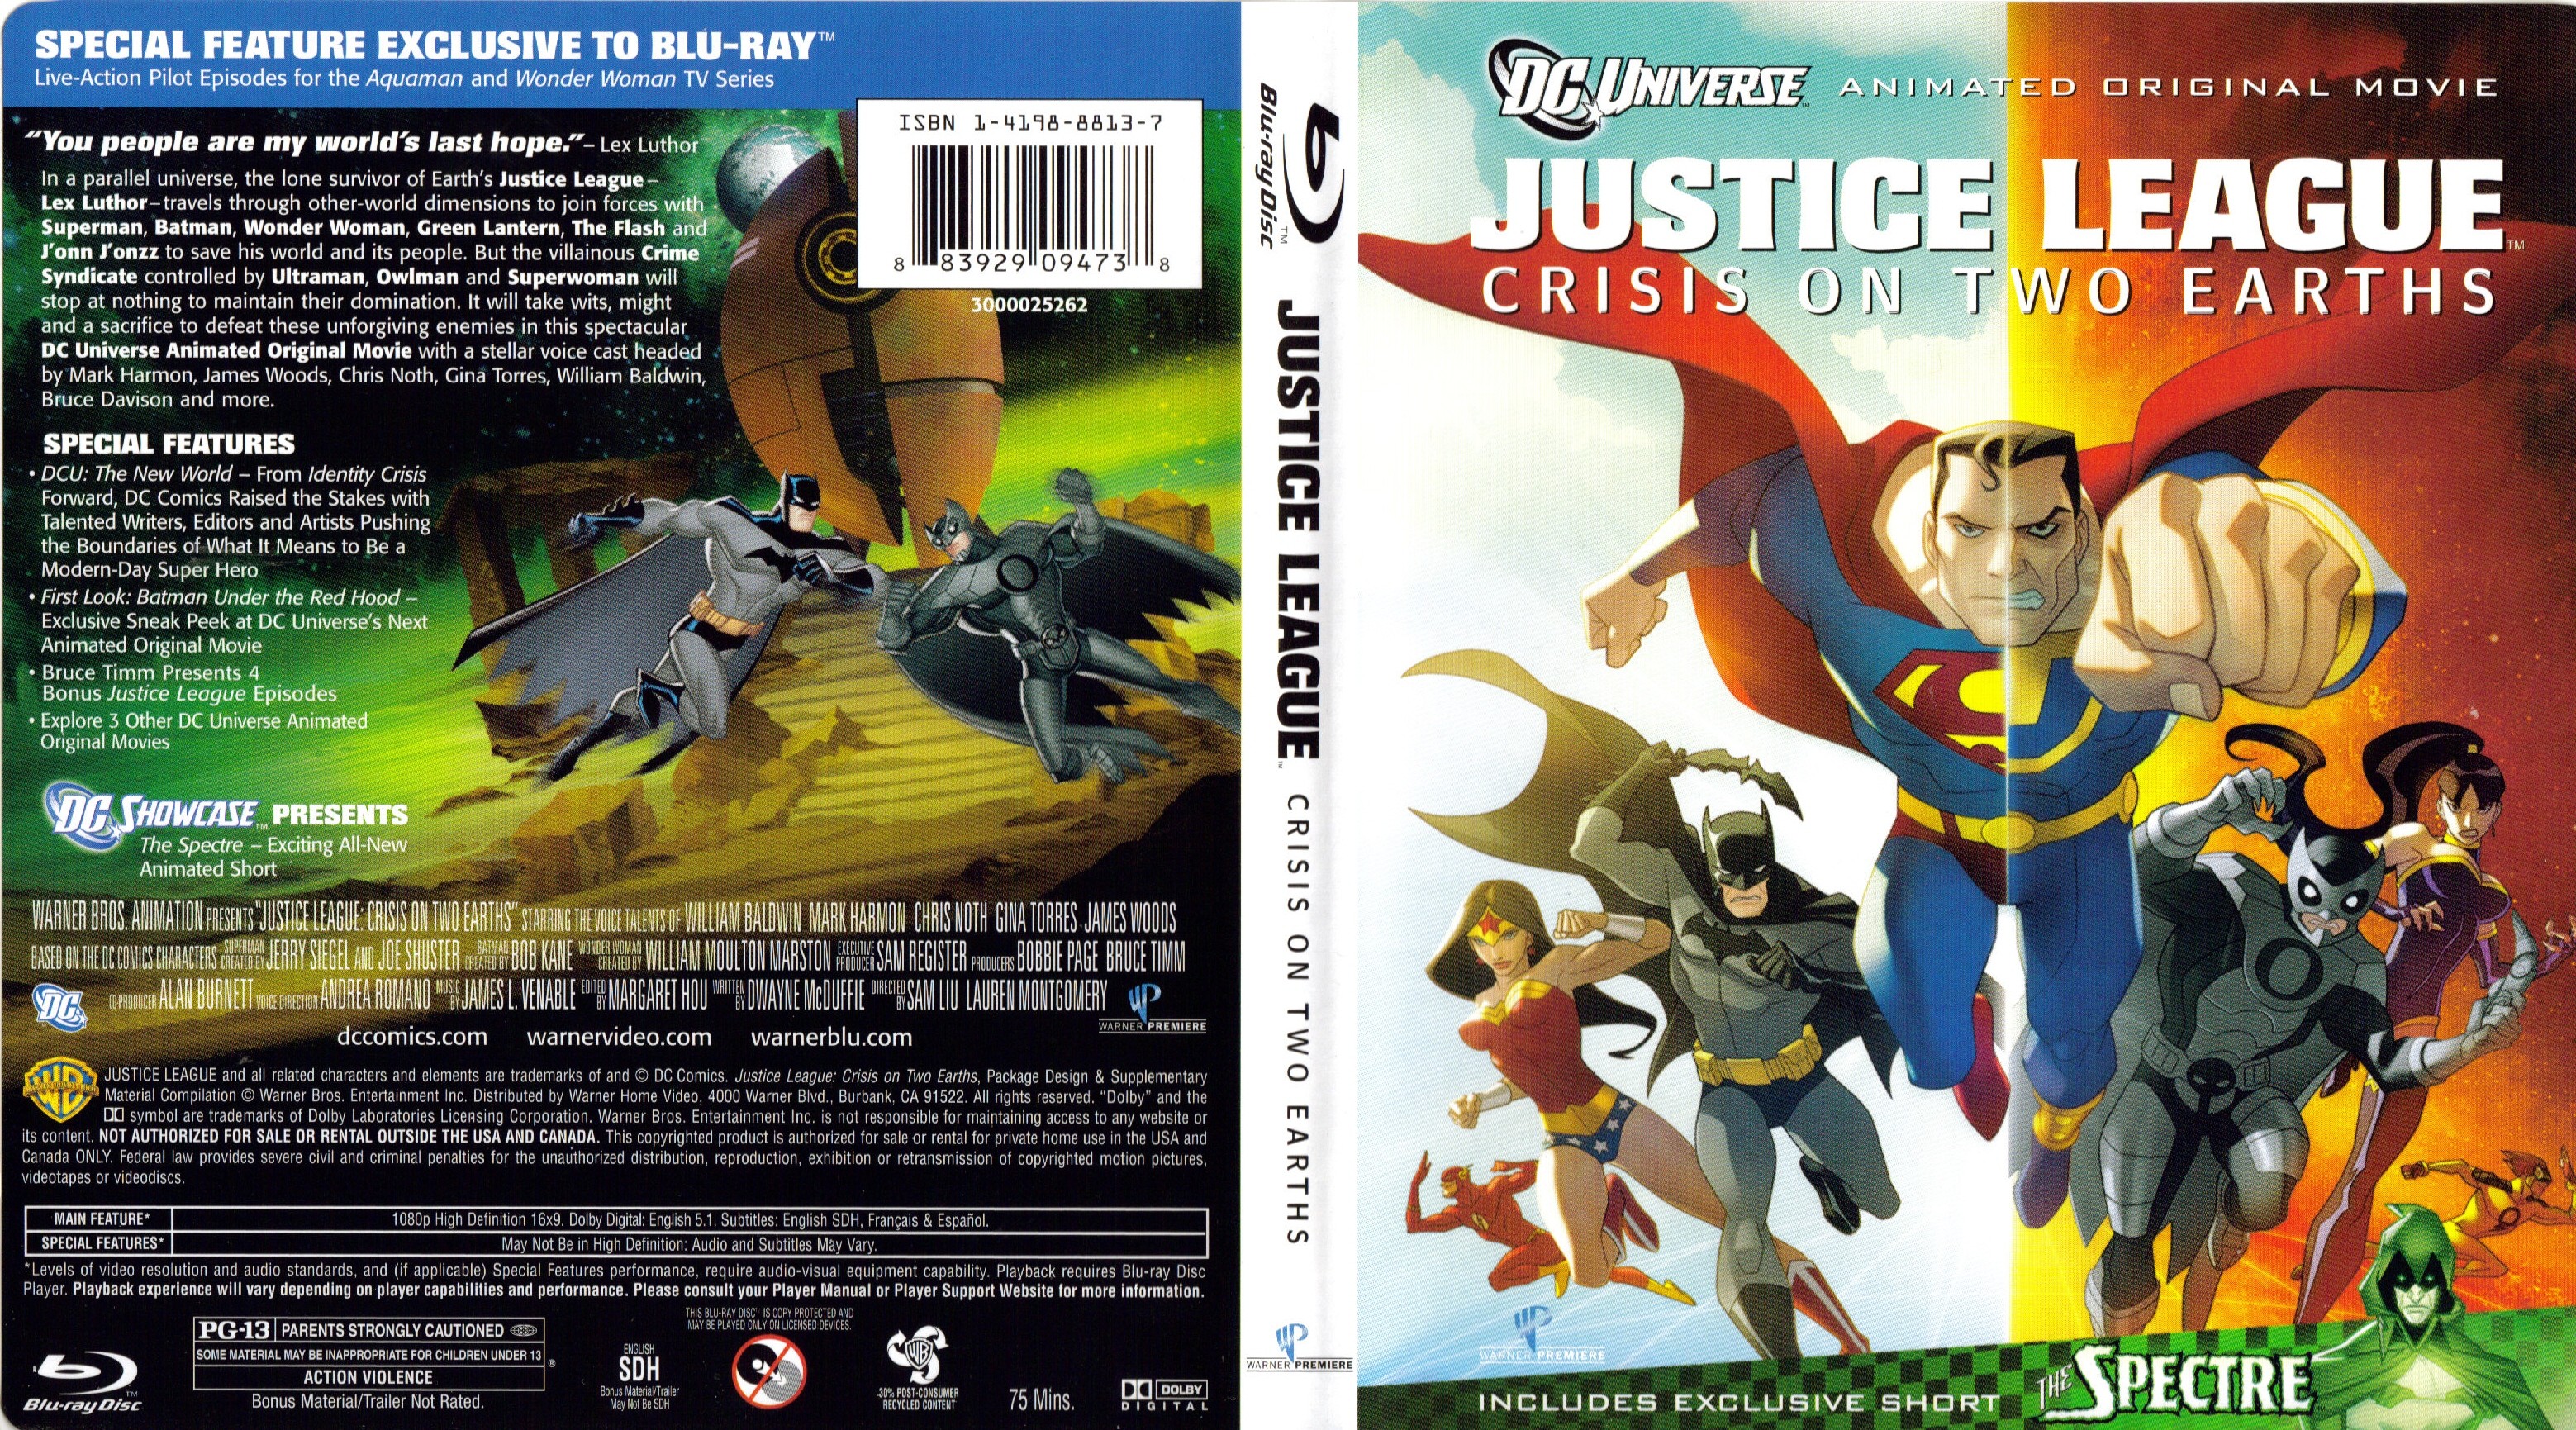 Jaquette DVD Justice League - Crisis On Two Earths Zone 1 (BLU-RAY)